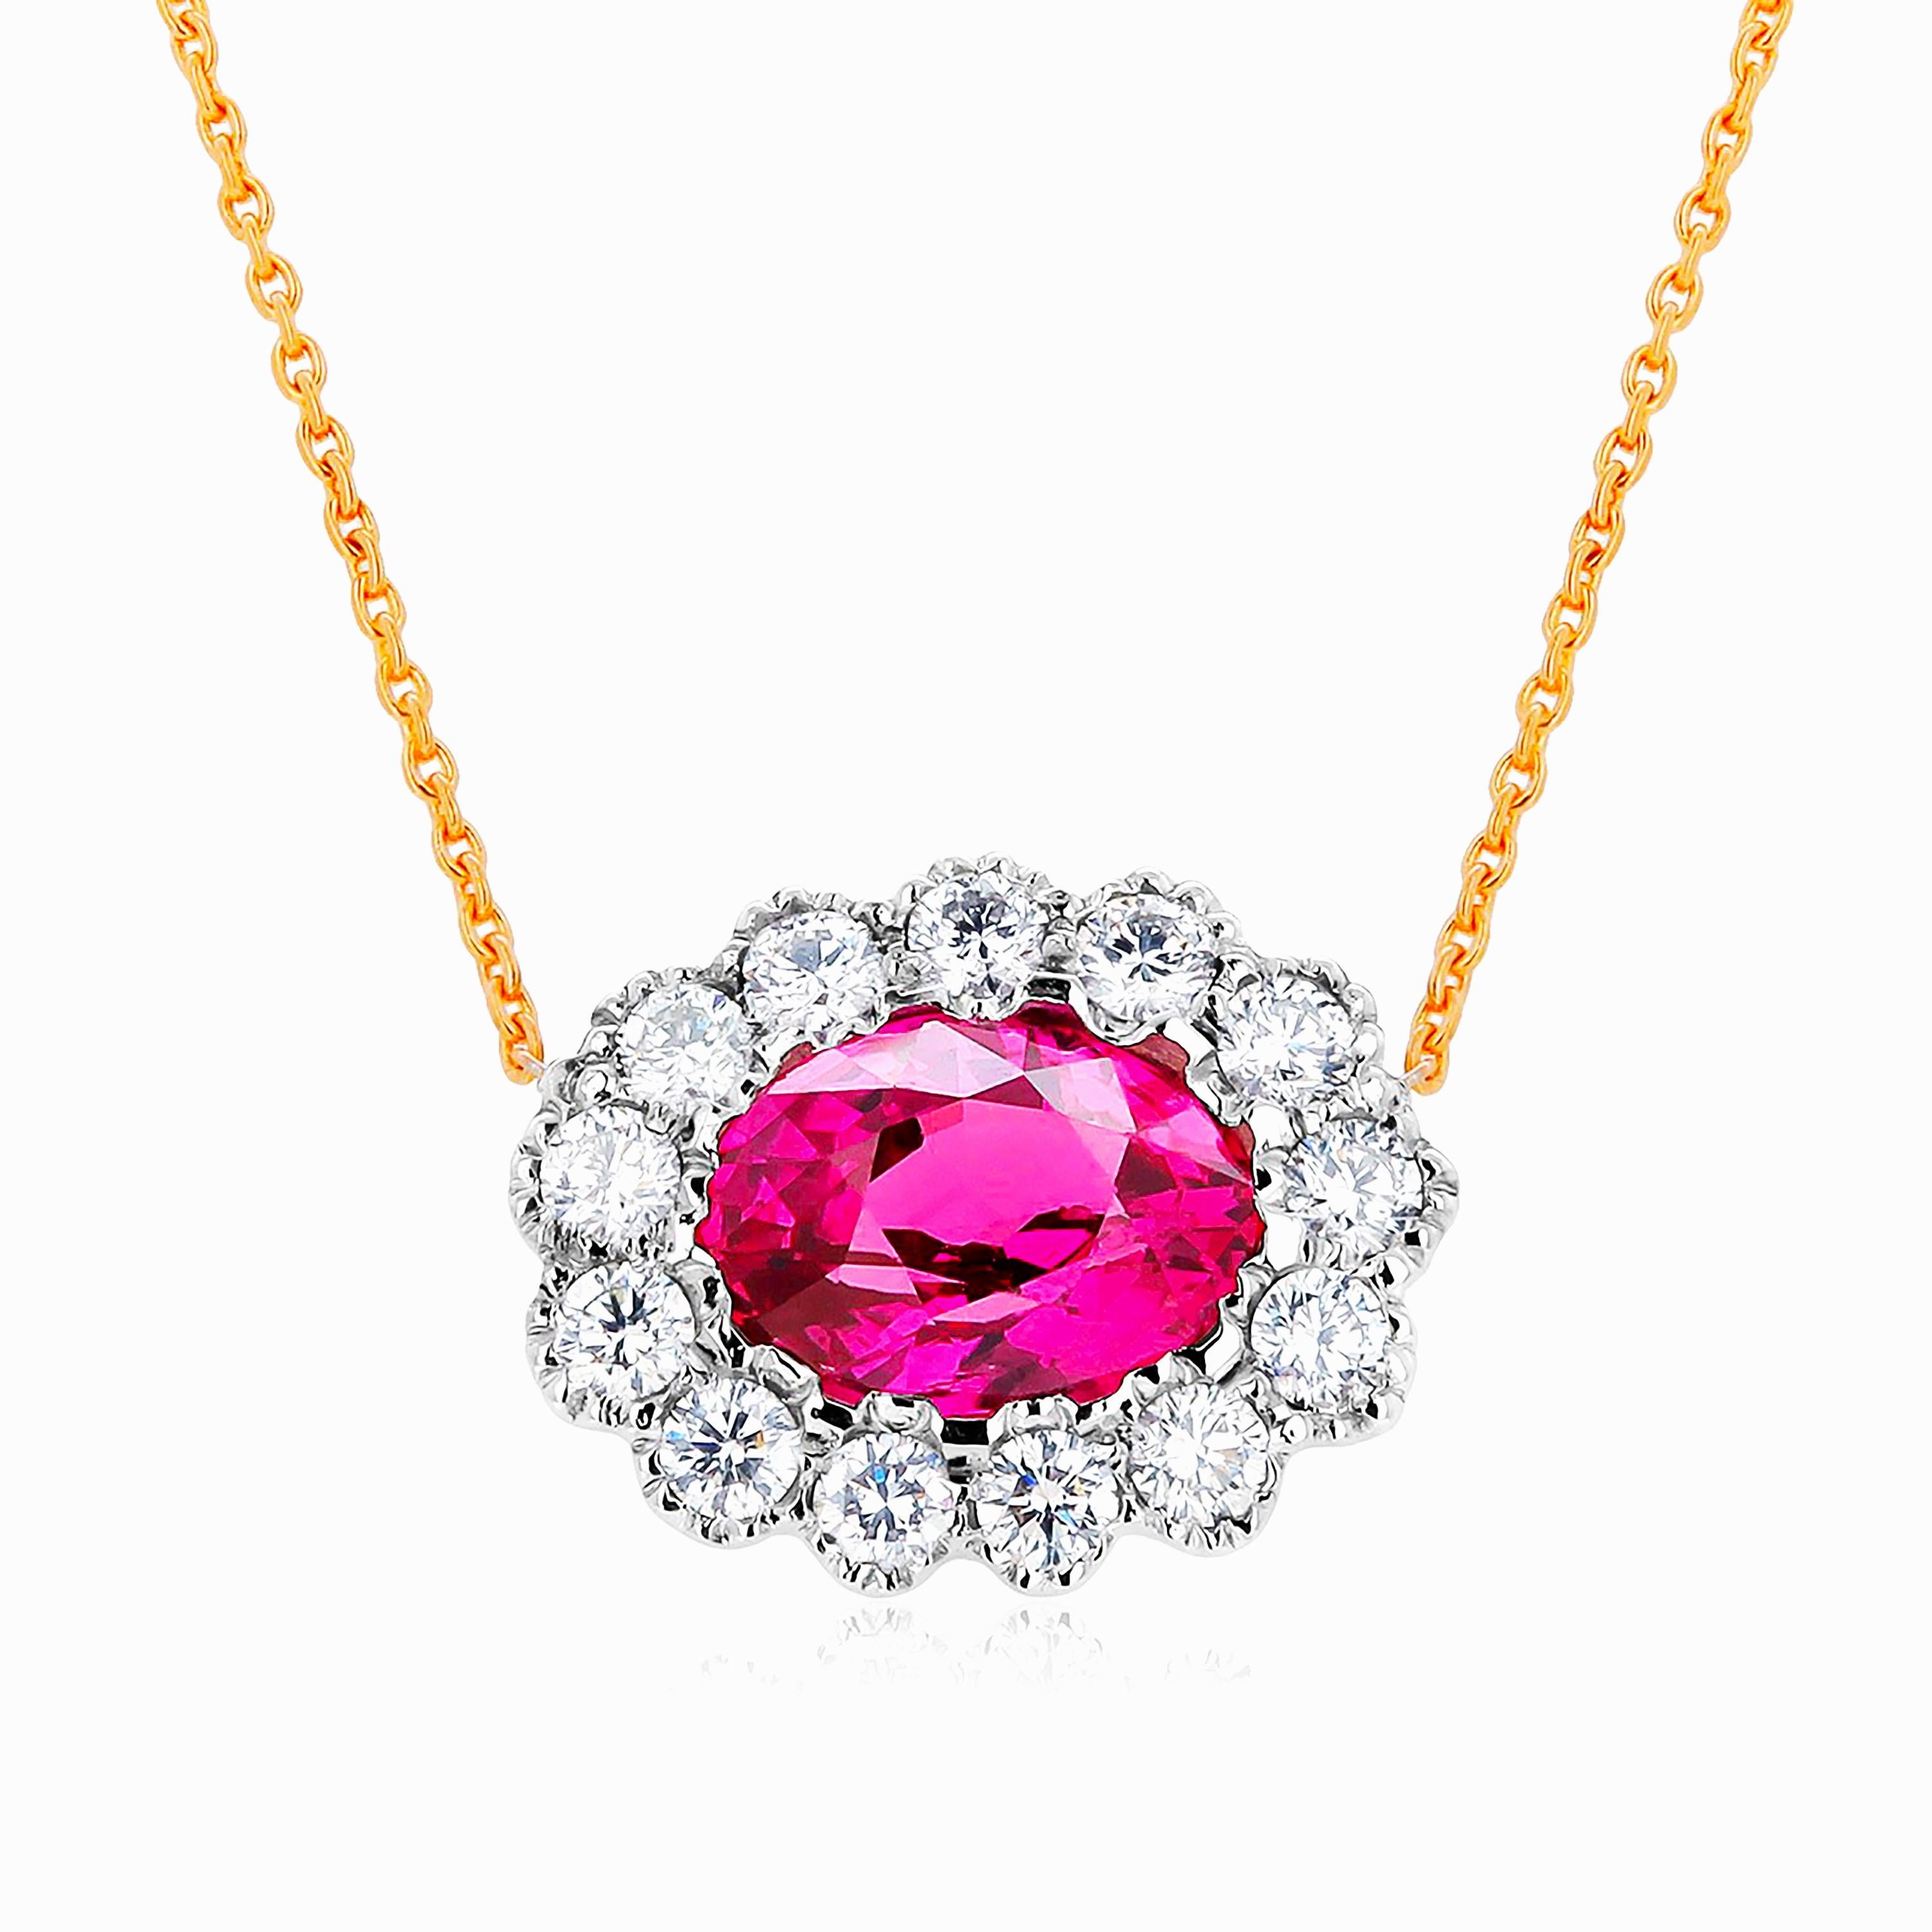 Oval Cut Oval Ruby Surrounded by Diamonds White and Rose Gold Layered Necklace Pendant